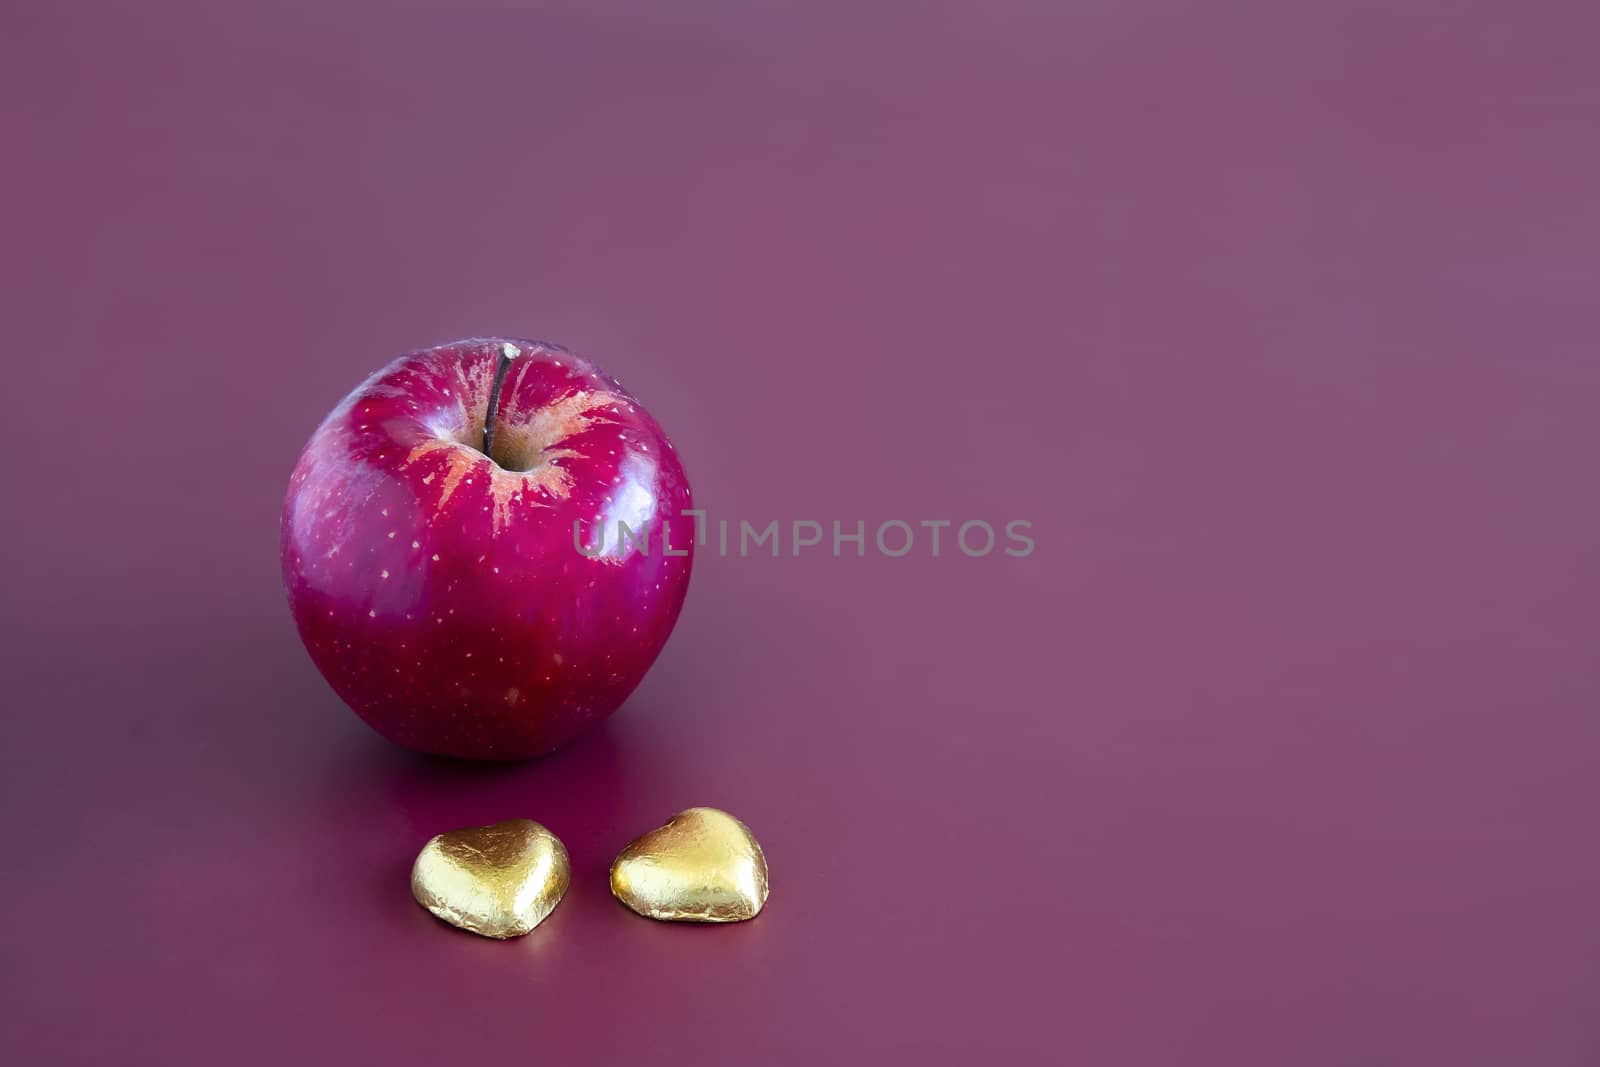 A red gala apple by Nawoot